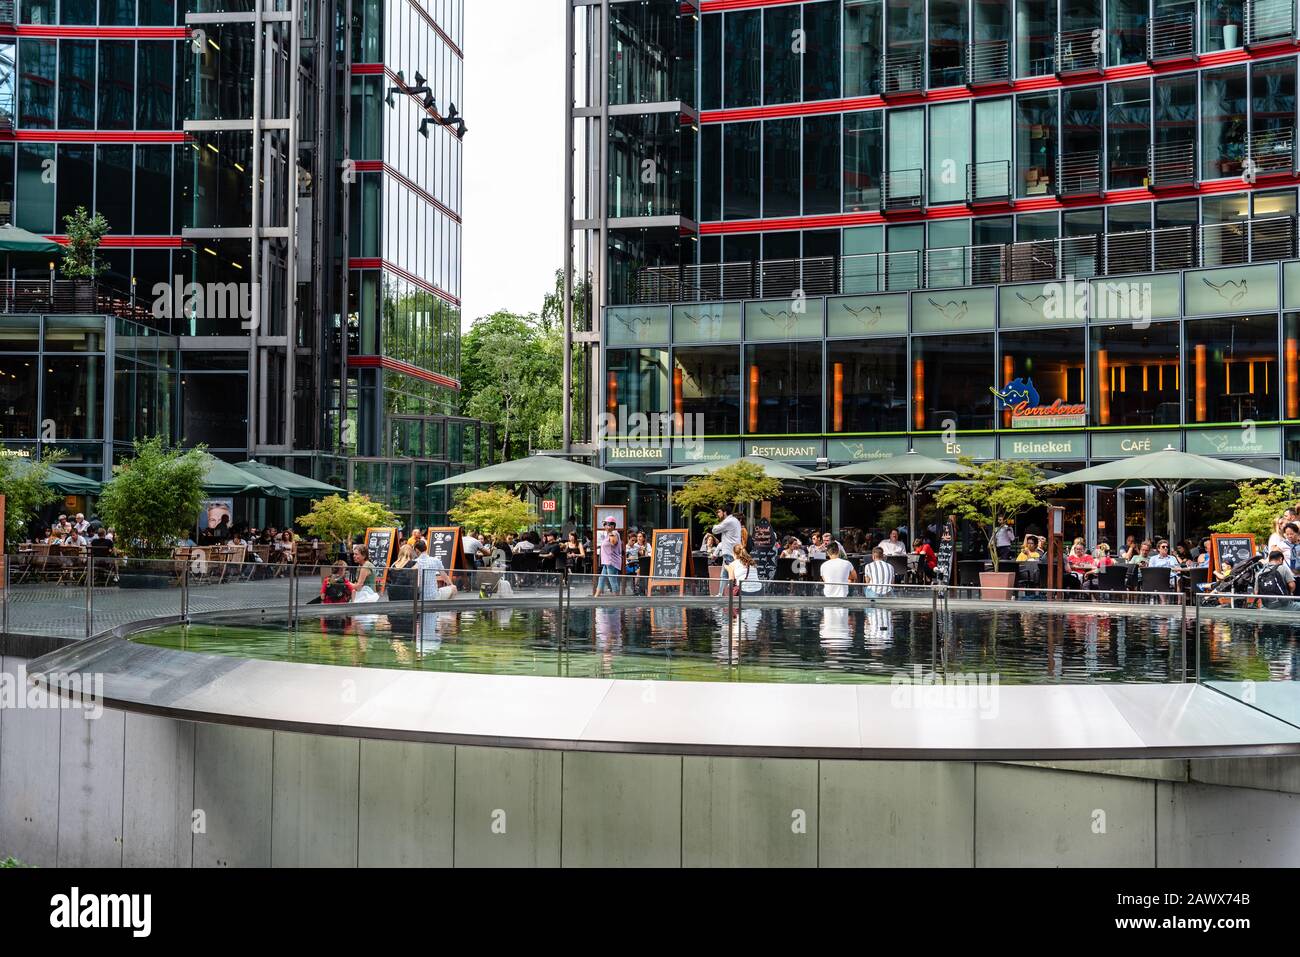 Berlin, Germany - July 28, 2019: The Sony Center is a Sony-sponsored building complex located at the Potsdamer Platz in Berlin Stock Photo